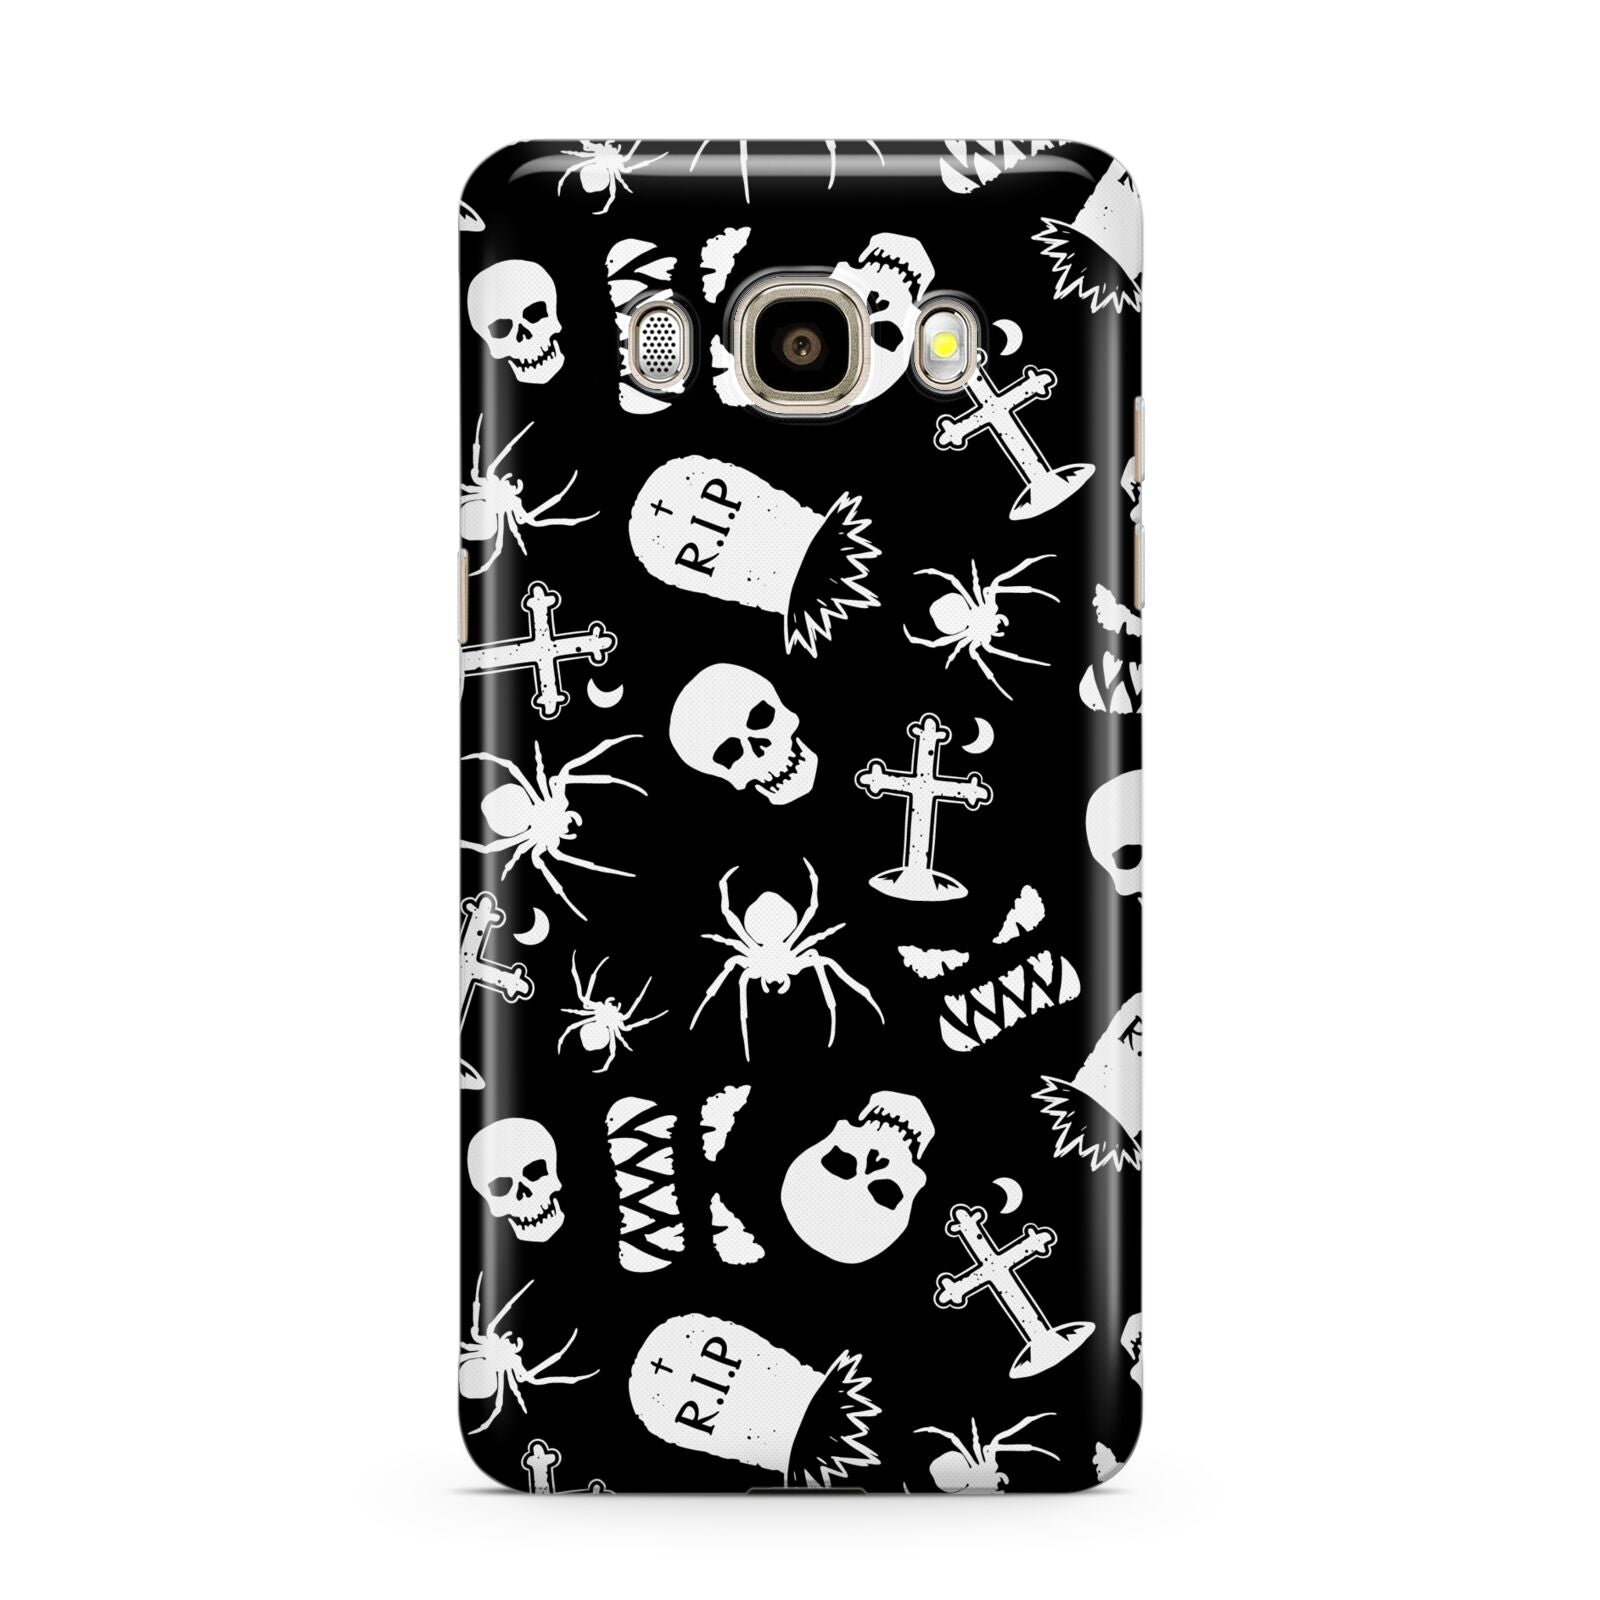 Spooky Illustrations Samsung Galaxy J7 2016 Case on gold phone